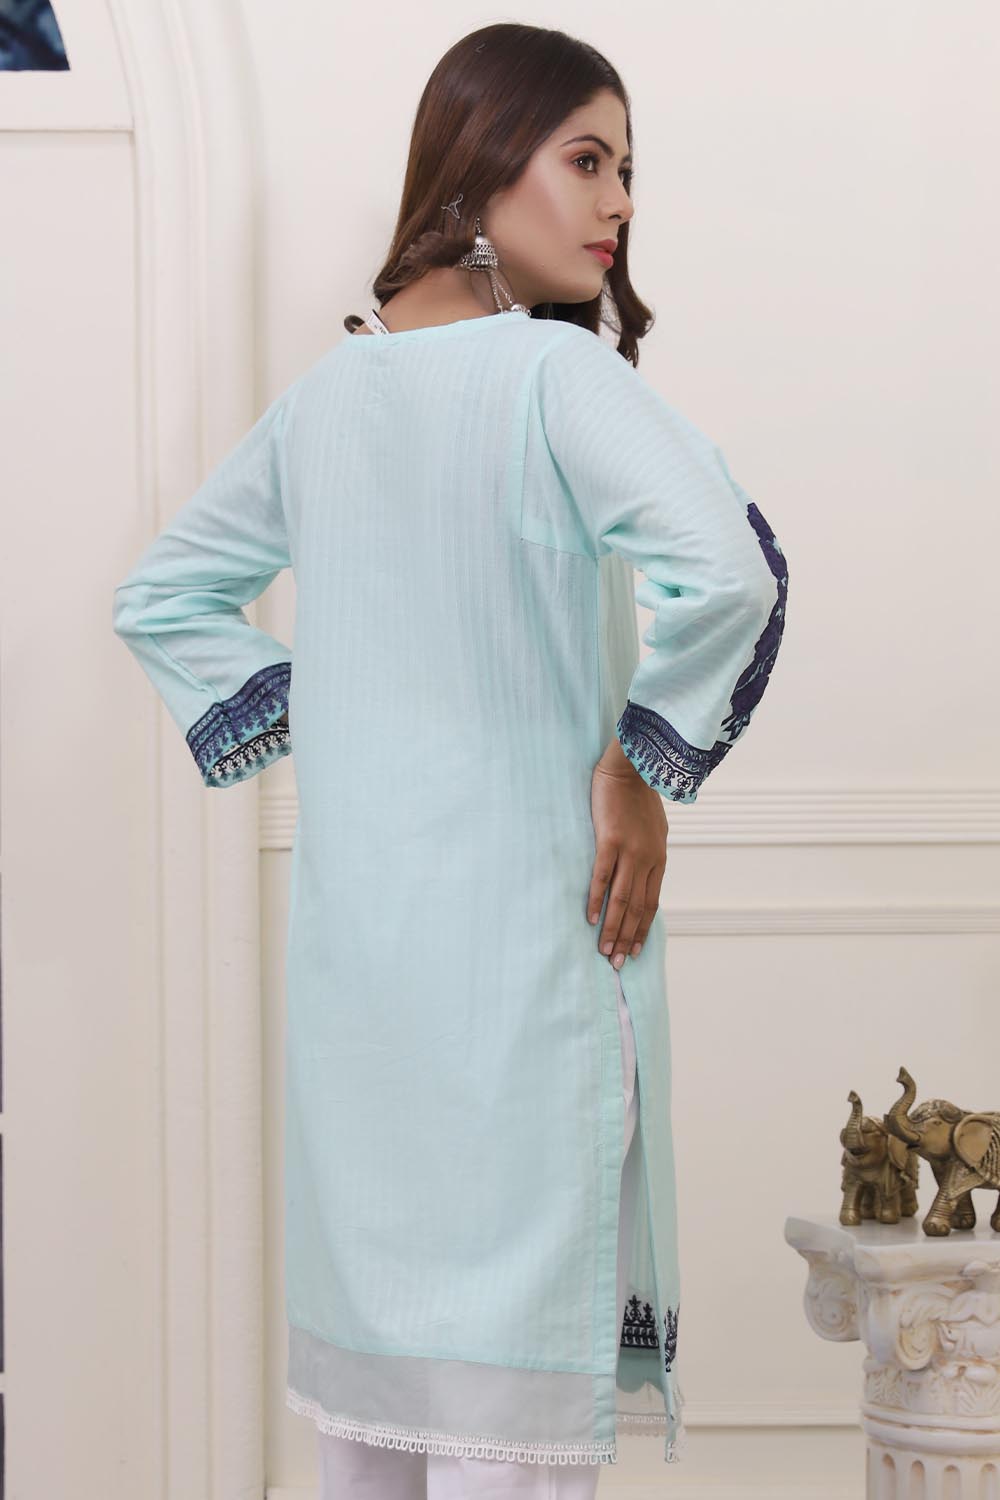 Oture 1PC Stitched Embroidered Self Jacquard Shirt With Lace Light Aqua